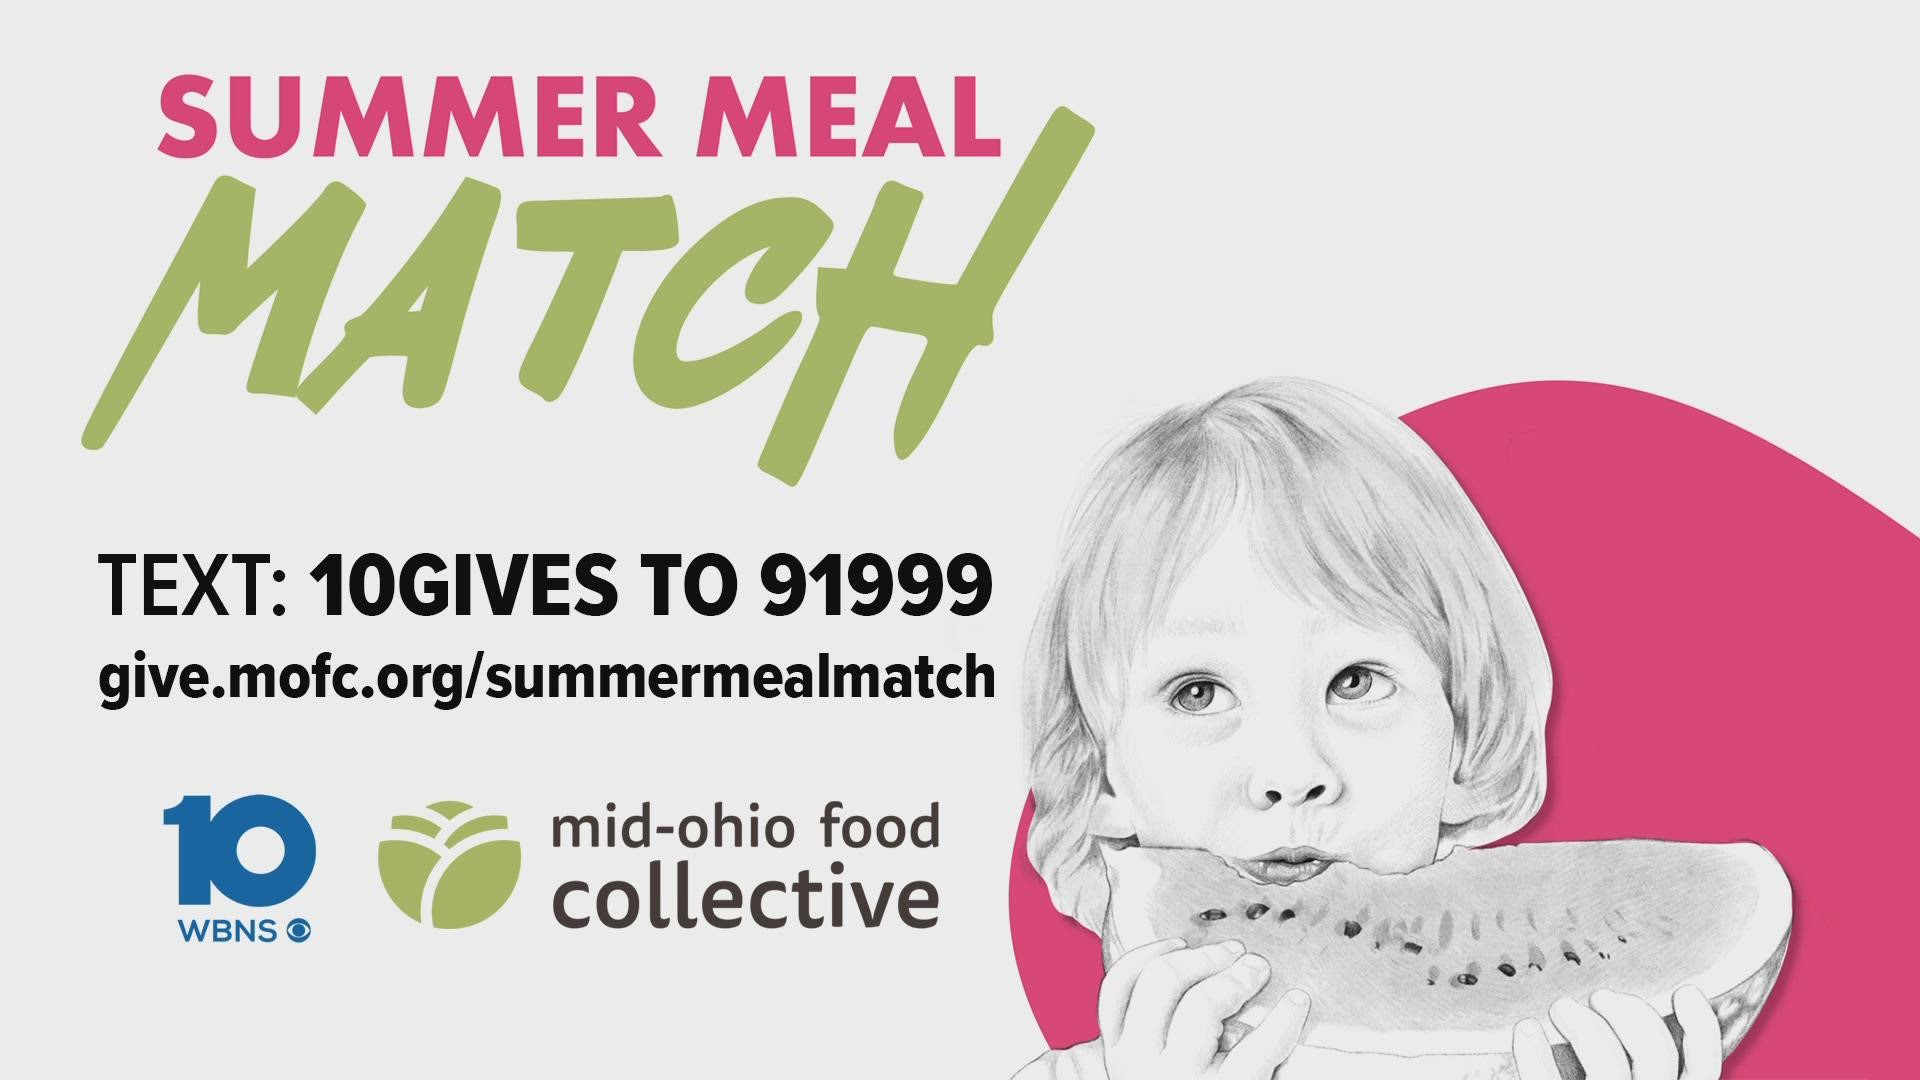 The Mid-Ohio Food Collective needs your help to make sure no child goes hungry this summer.